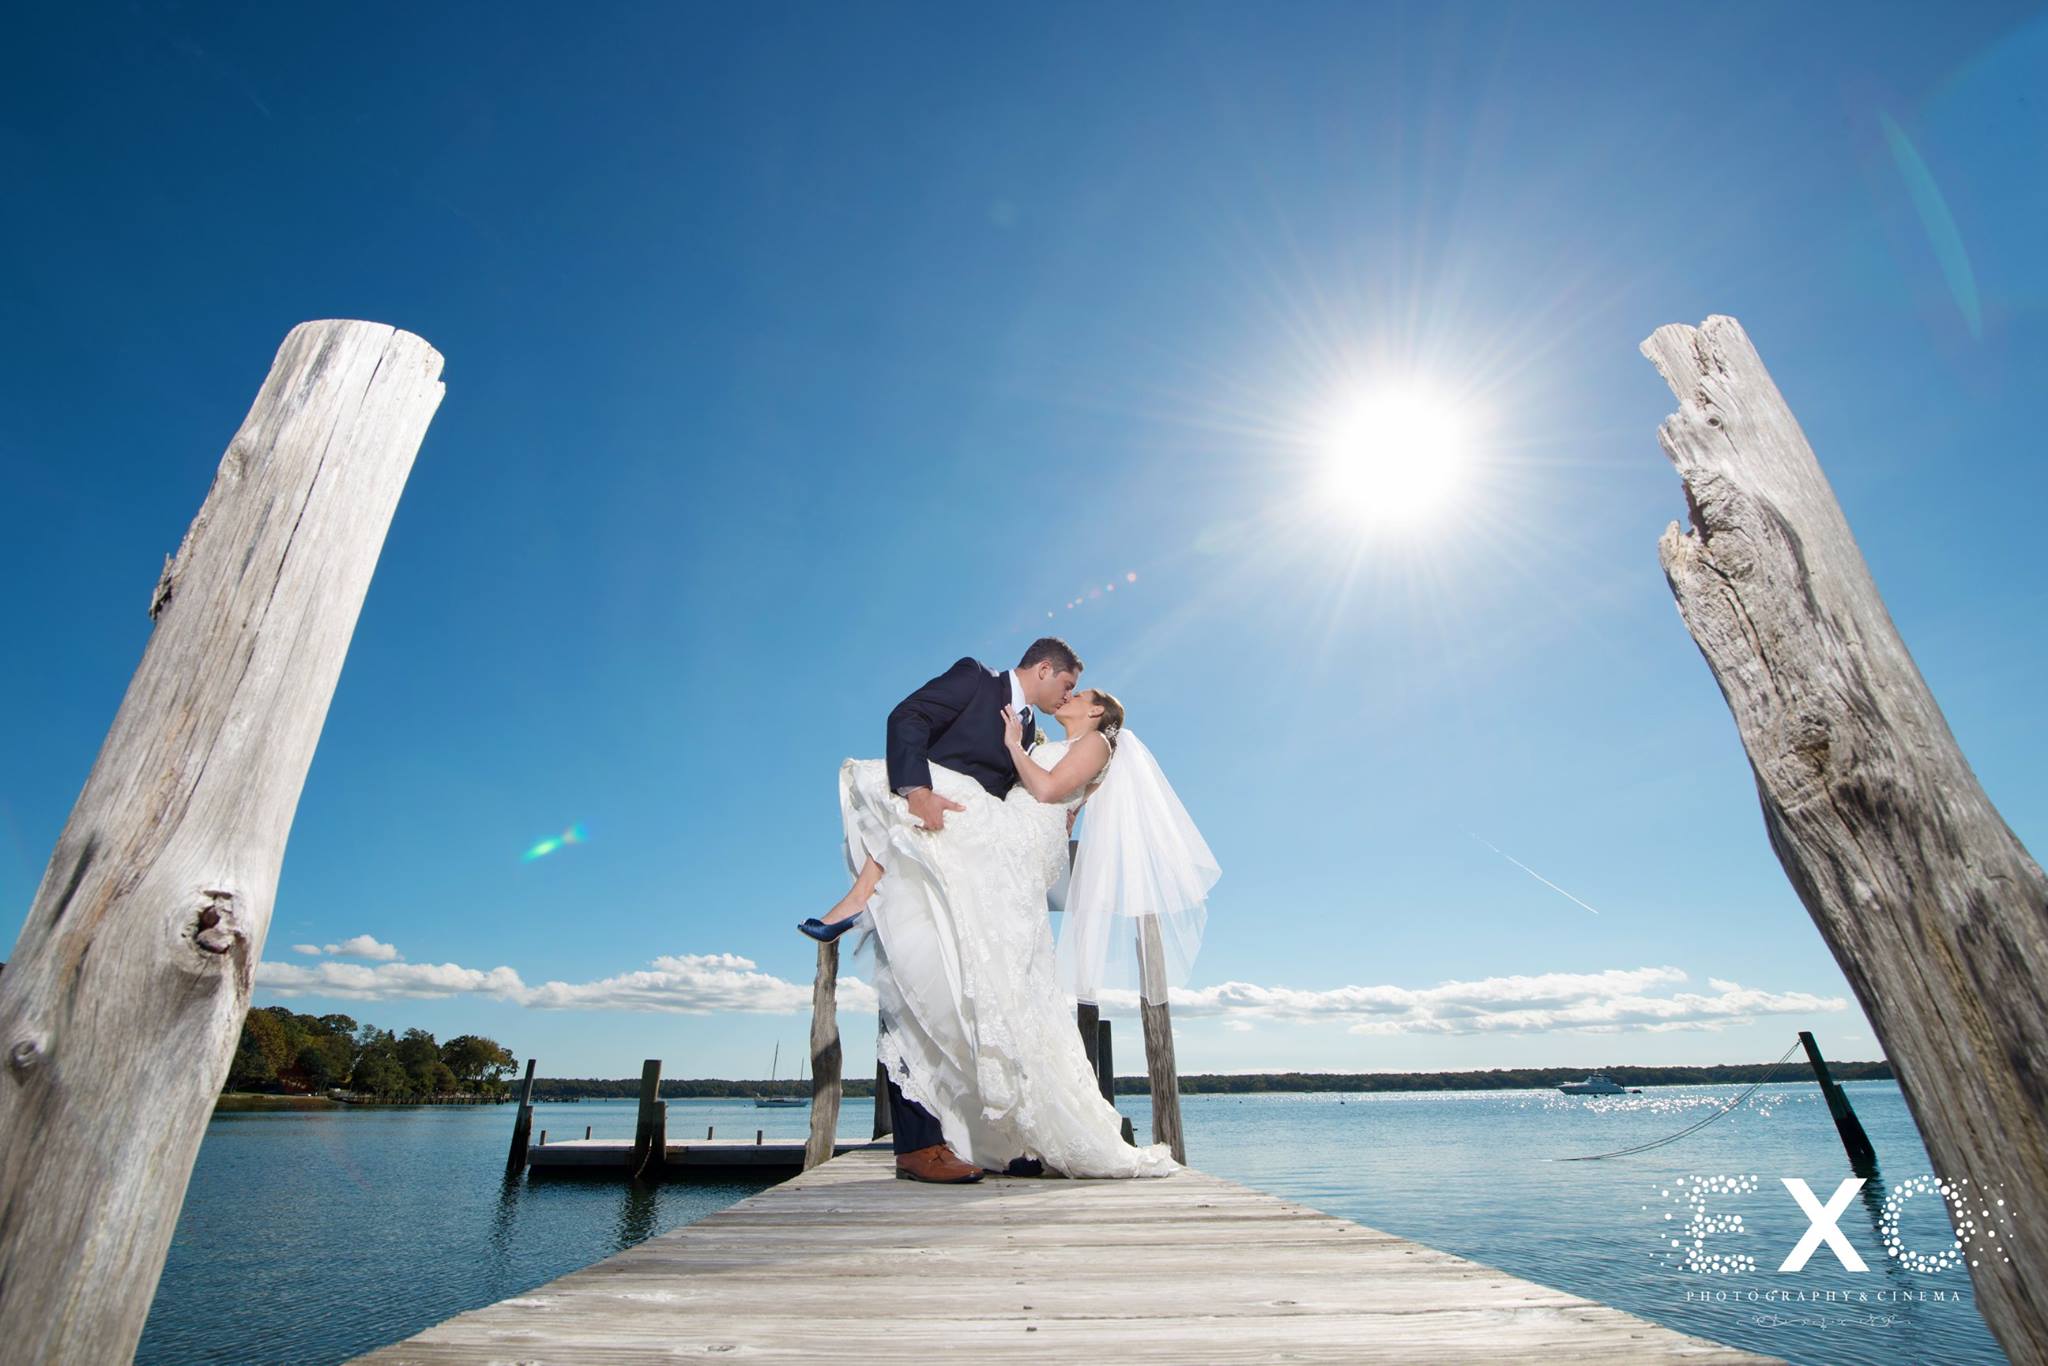 Bride and groom at the dock of The Ram's Head Inn